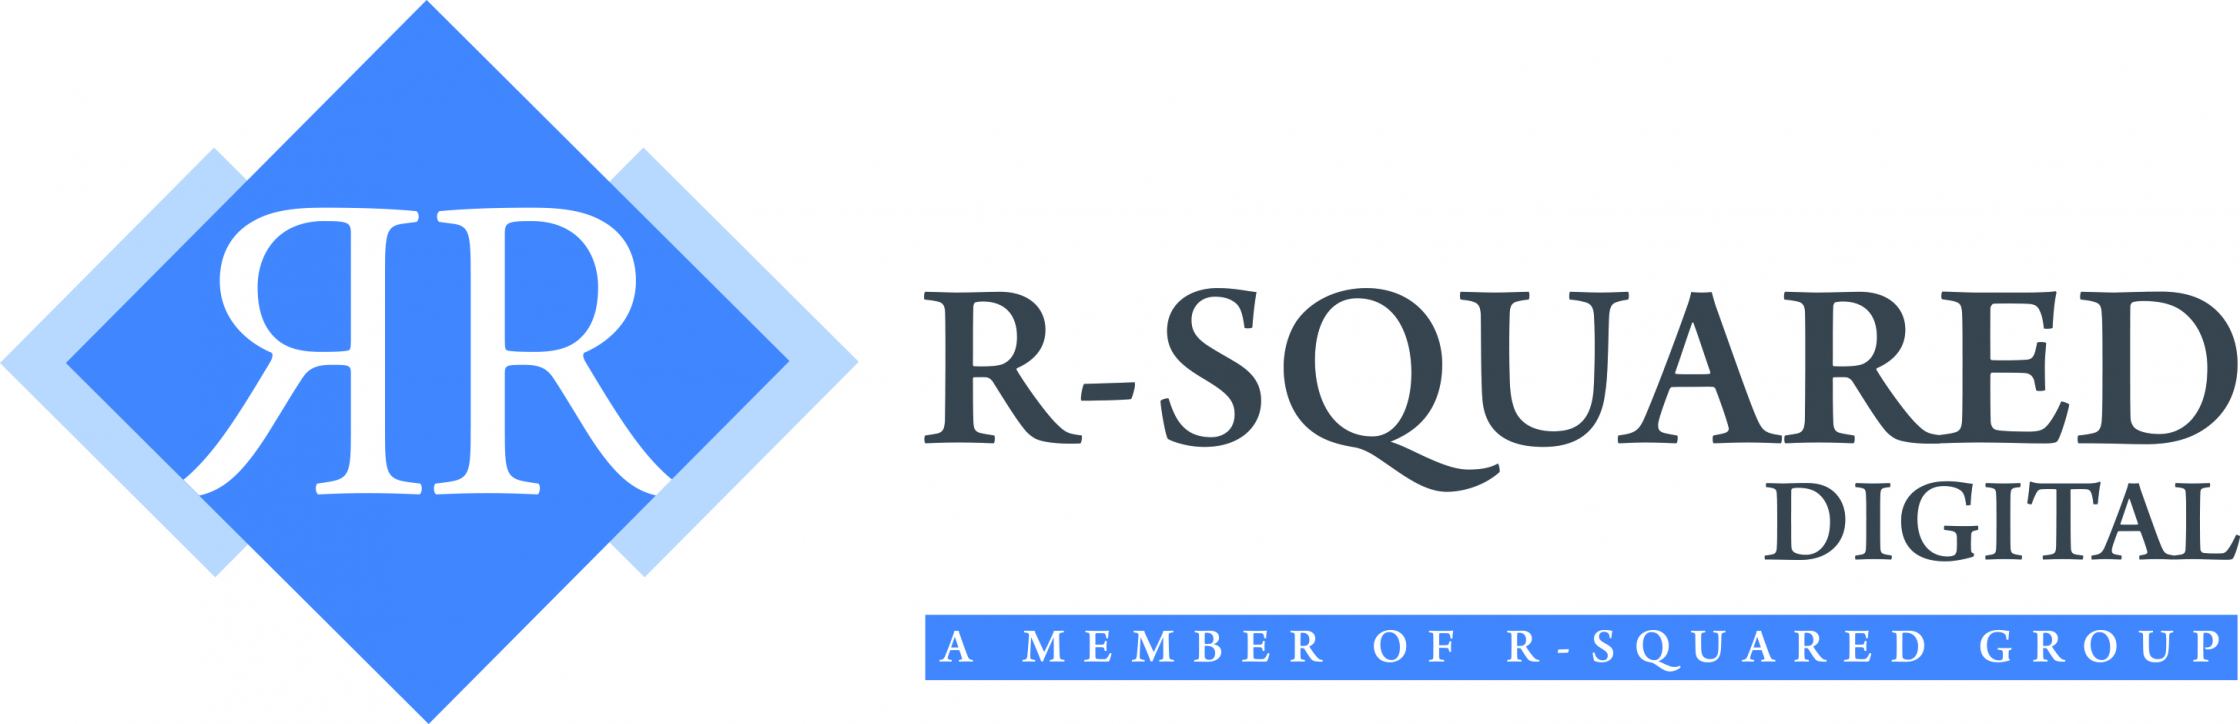 R-Squared Digital South Africa